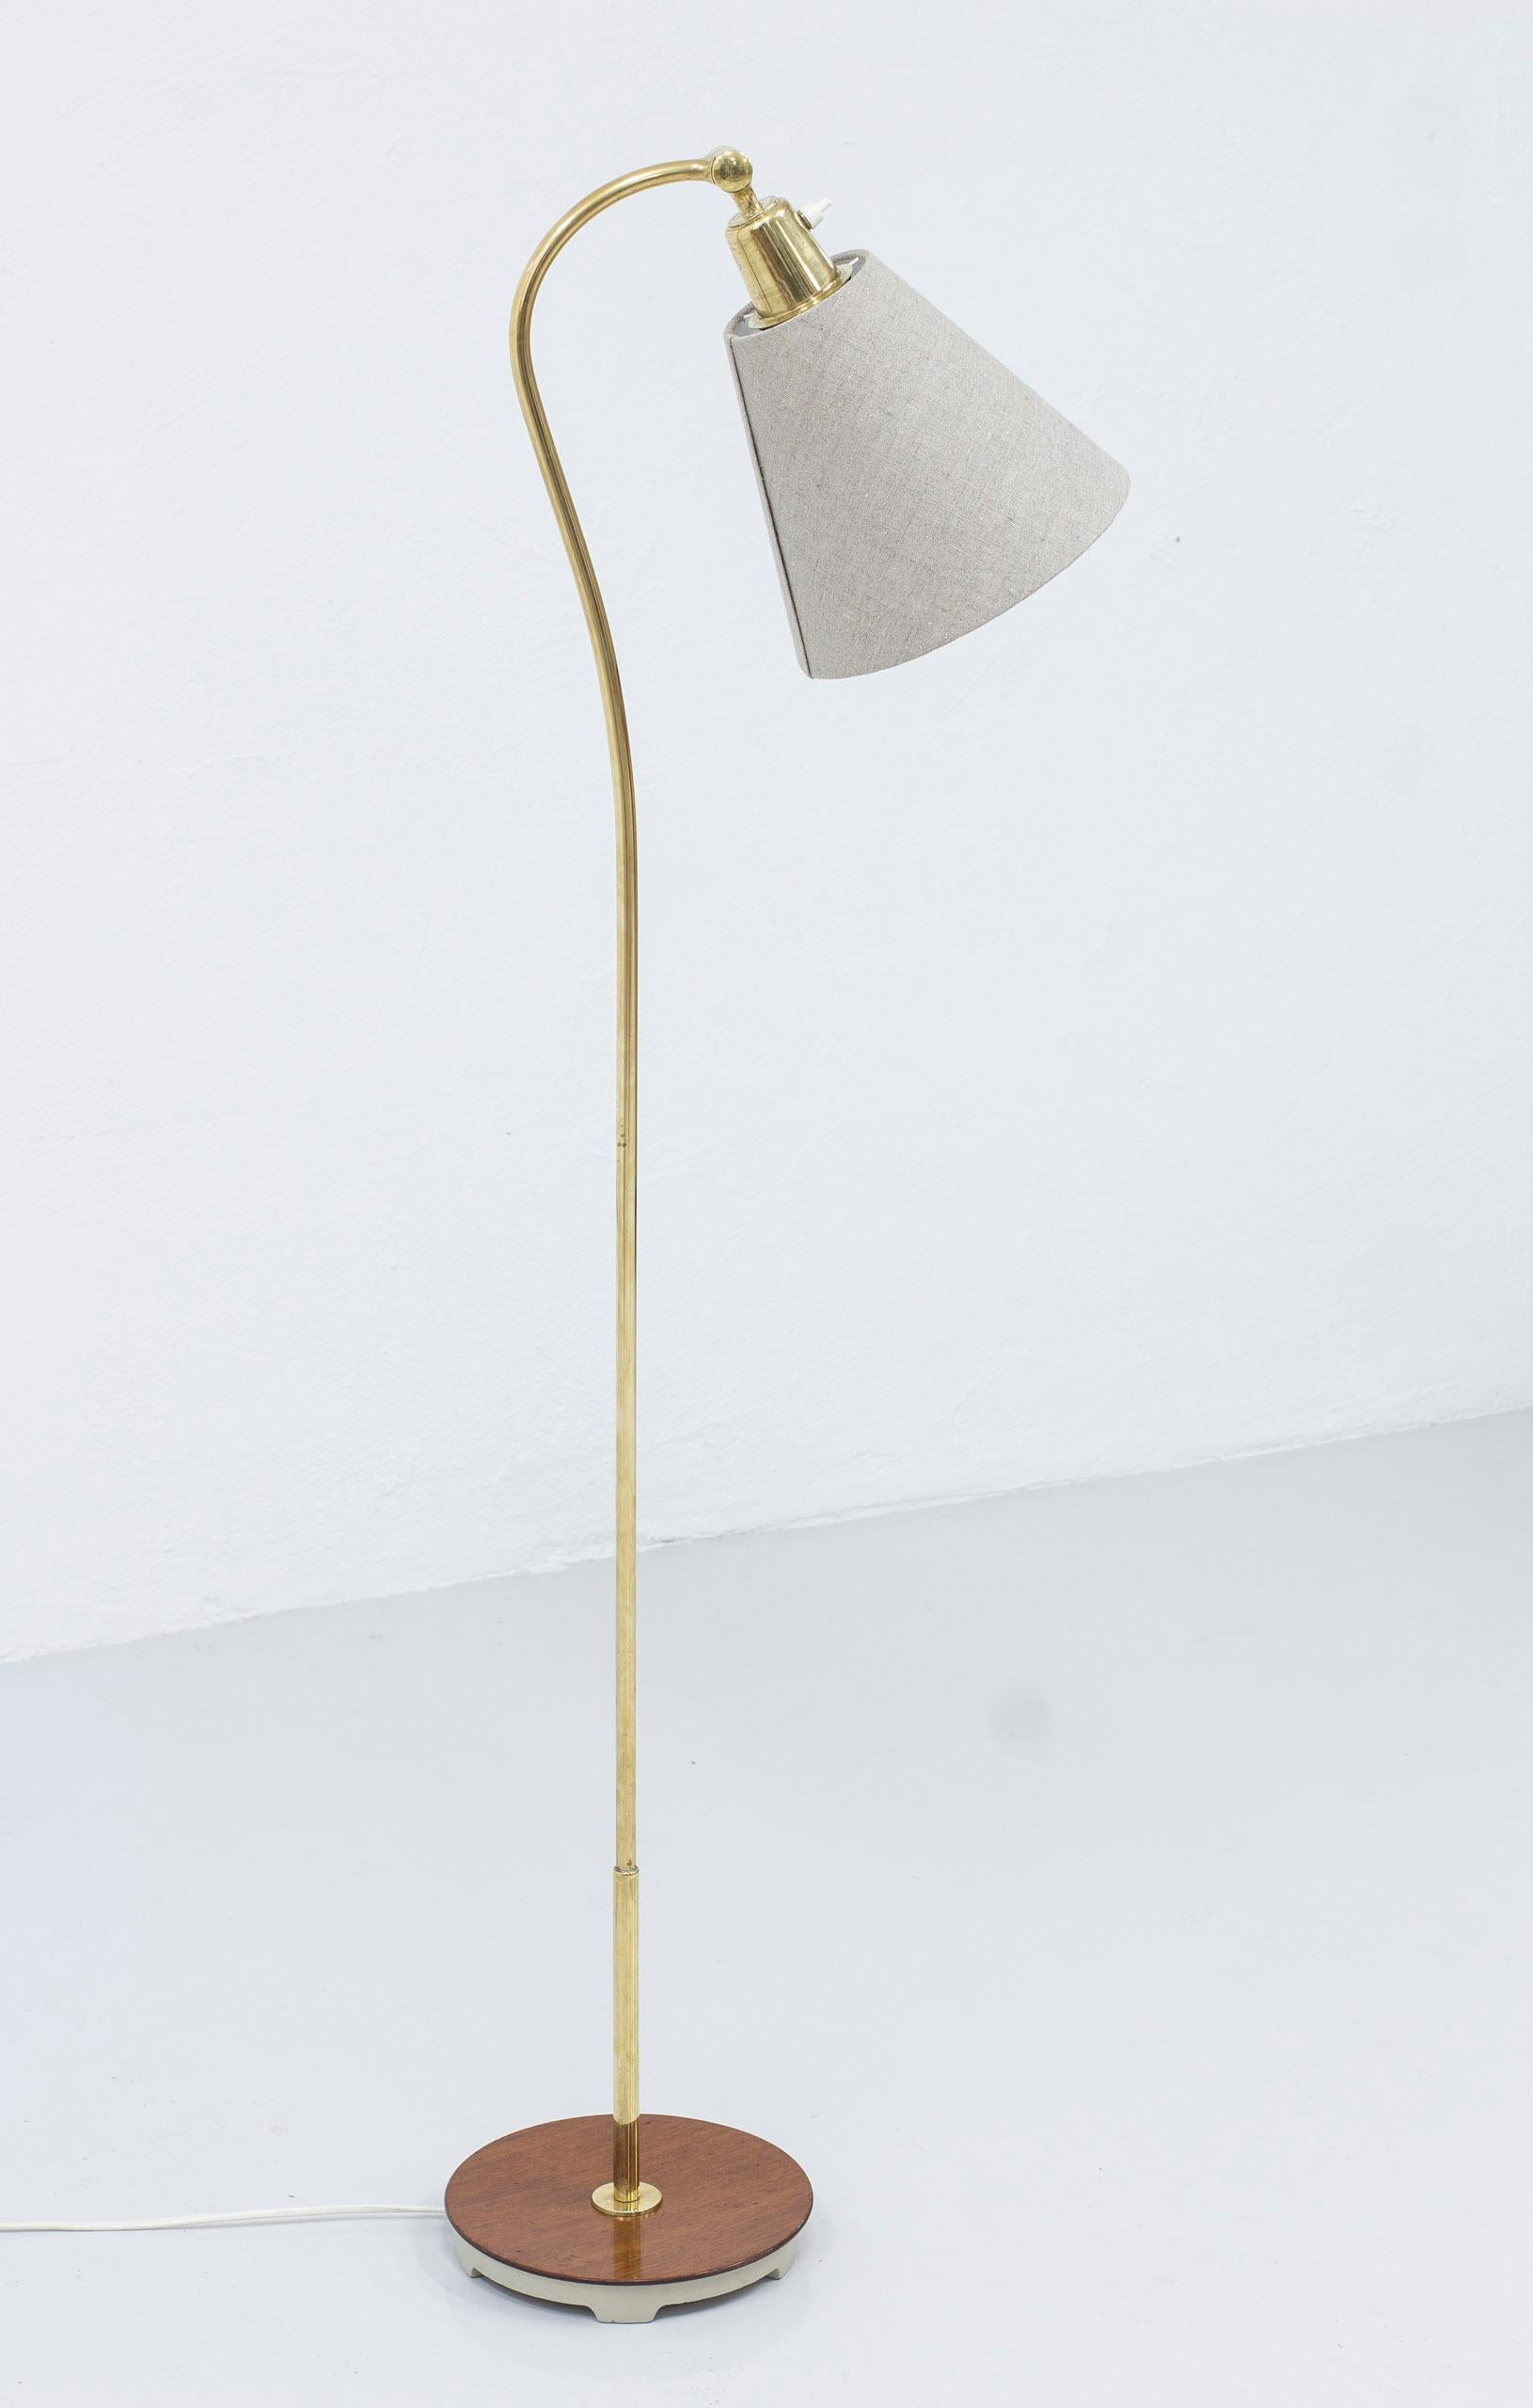 Floor lamp model 531011 designed by Bertil Brisborg. Produced by Nordiska Kompaniet for the Triva series. Designed around 1948 and produced sometime between there and the 1950s. Made from grey lacquered cast iron, mahogany and brass. New lamp shade